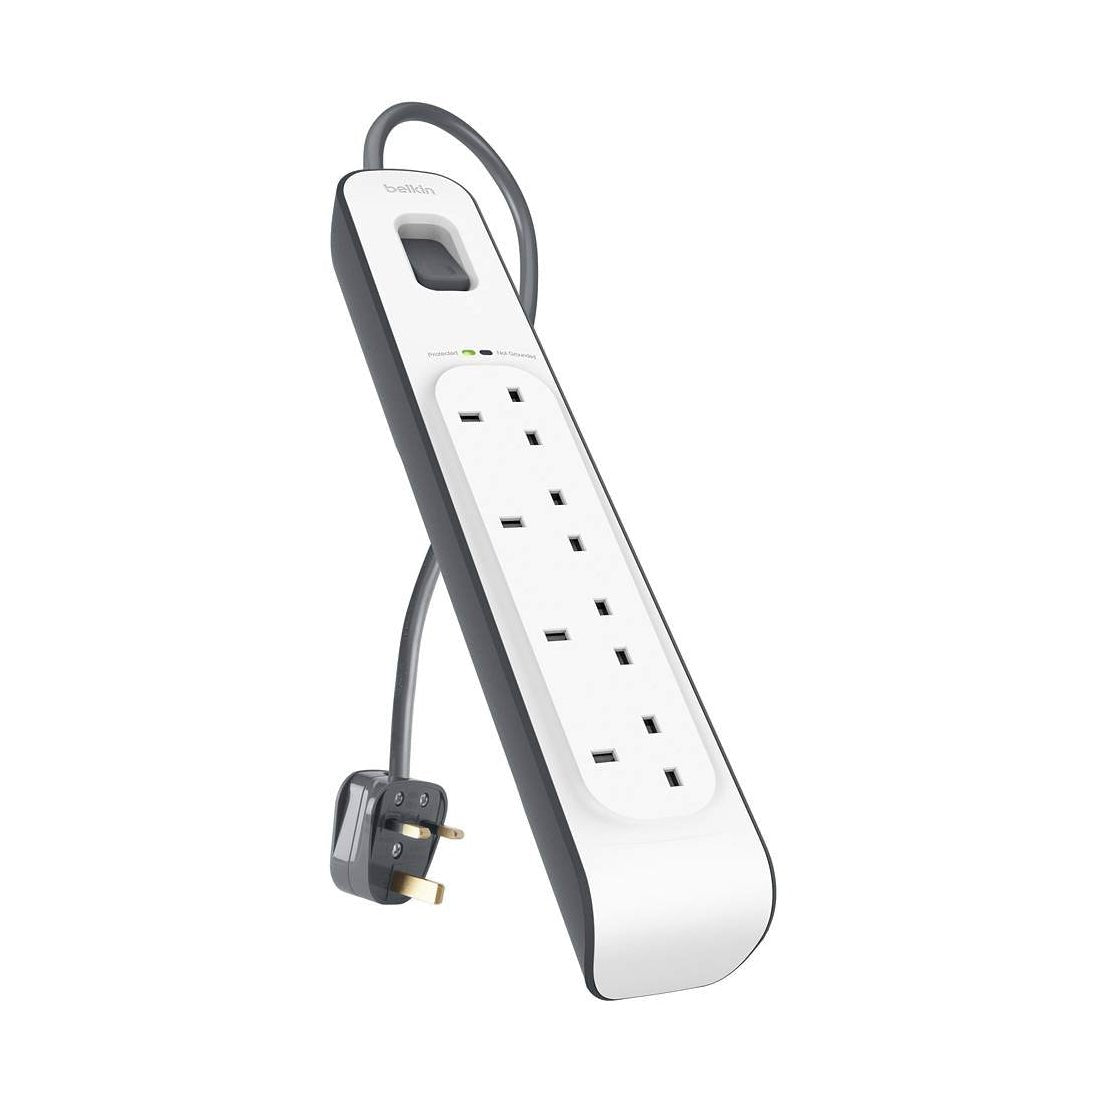 Belkin 4-outlet Surge Protection Strip with 2M Power Cord - Store 974 | ستور ٩٧٤